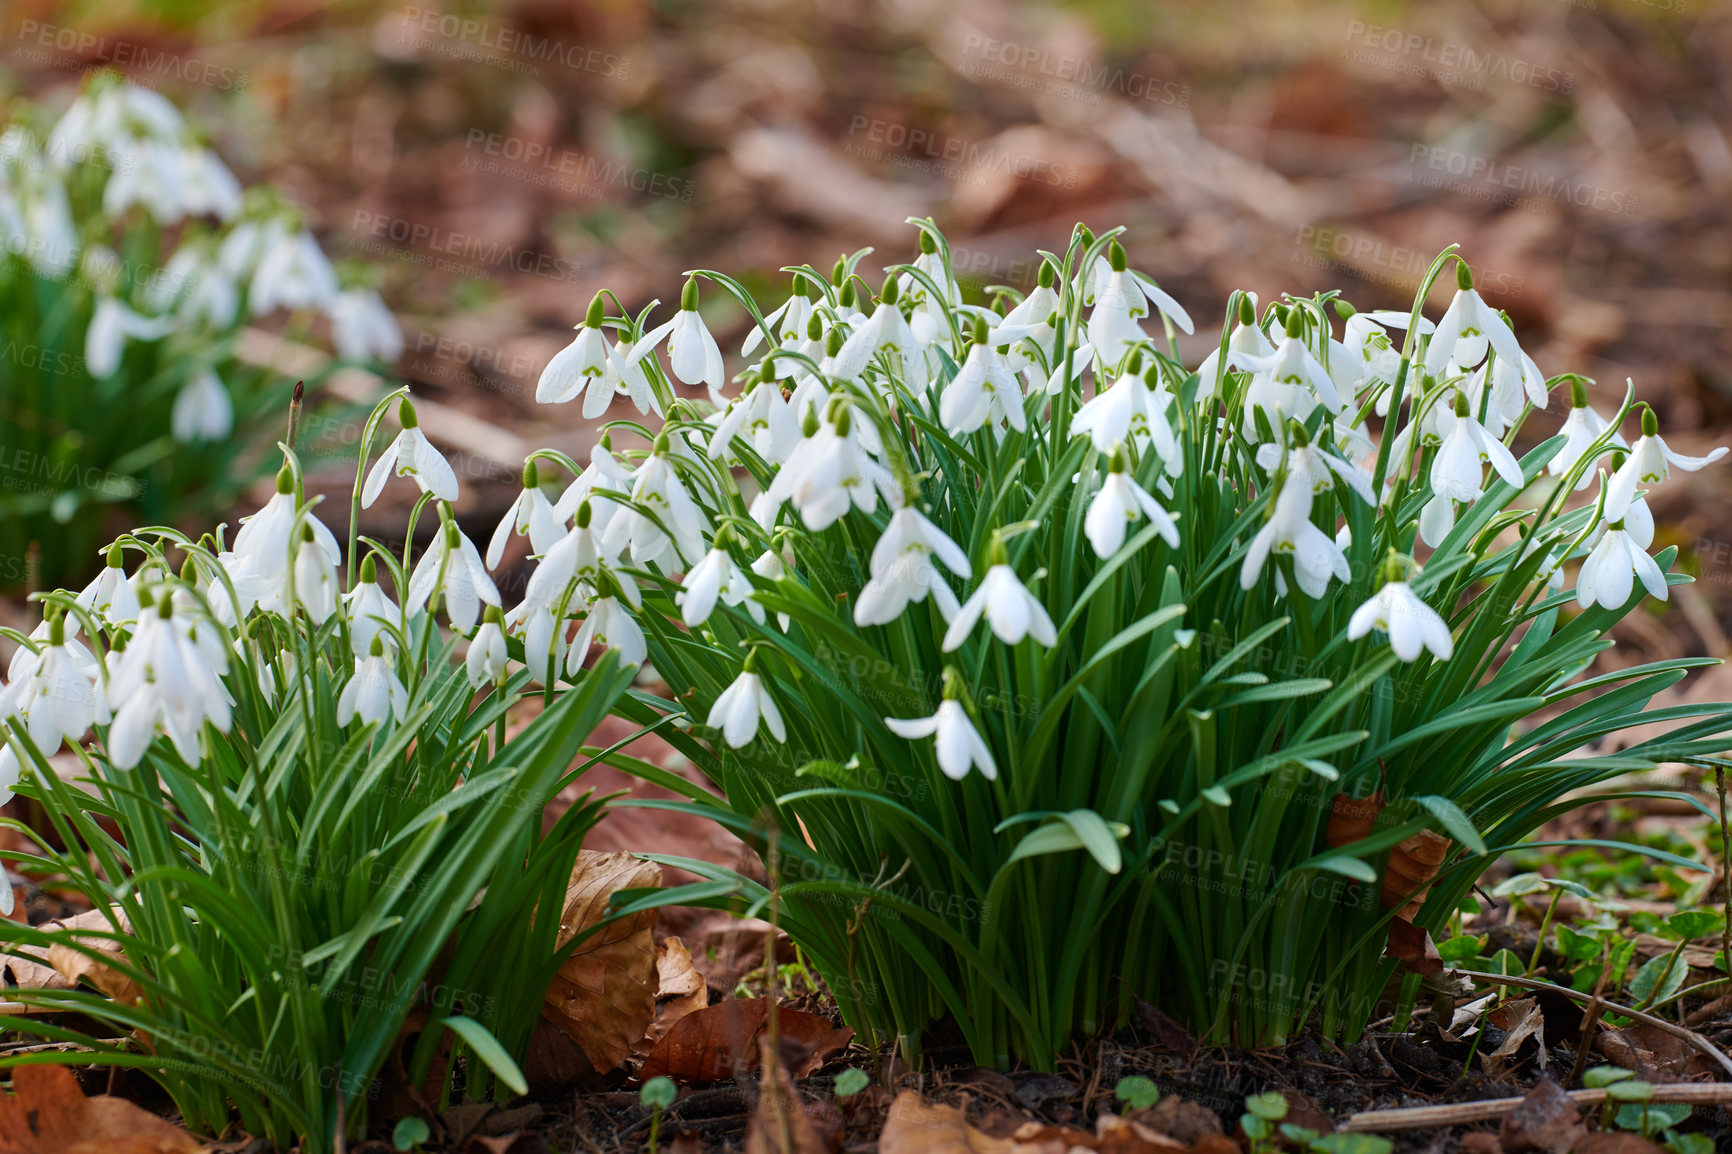 Buy stock photo Galanthus nivalis was described by the Swedish botanist Carl Linnaeus in his Species Plantarum in 1753, and given the specific epithet nivalis, meaning snowy (Galanthus means with milk-white flowers). T